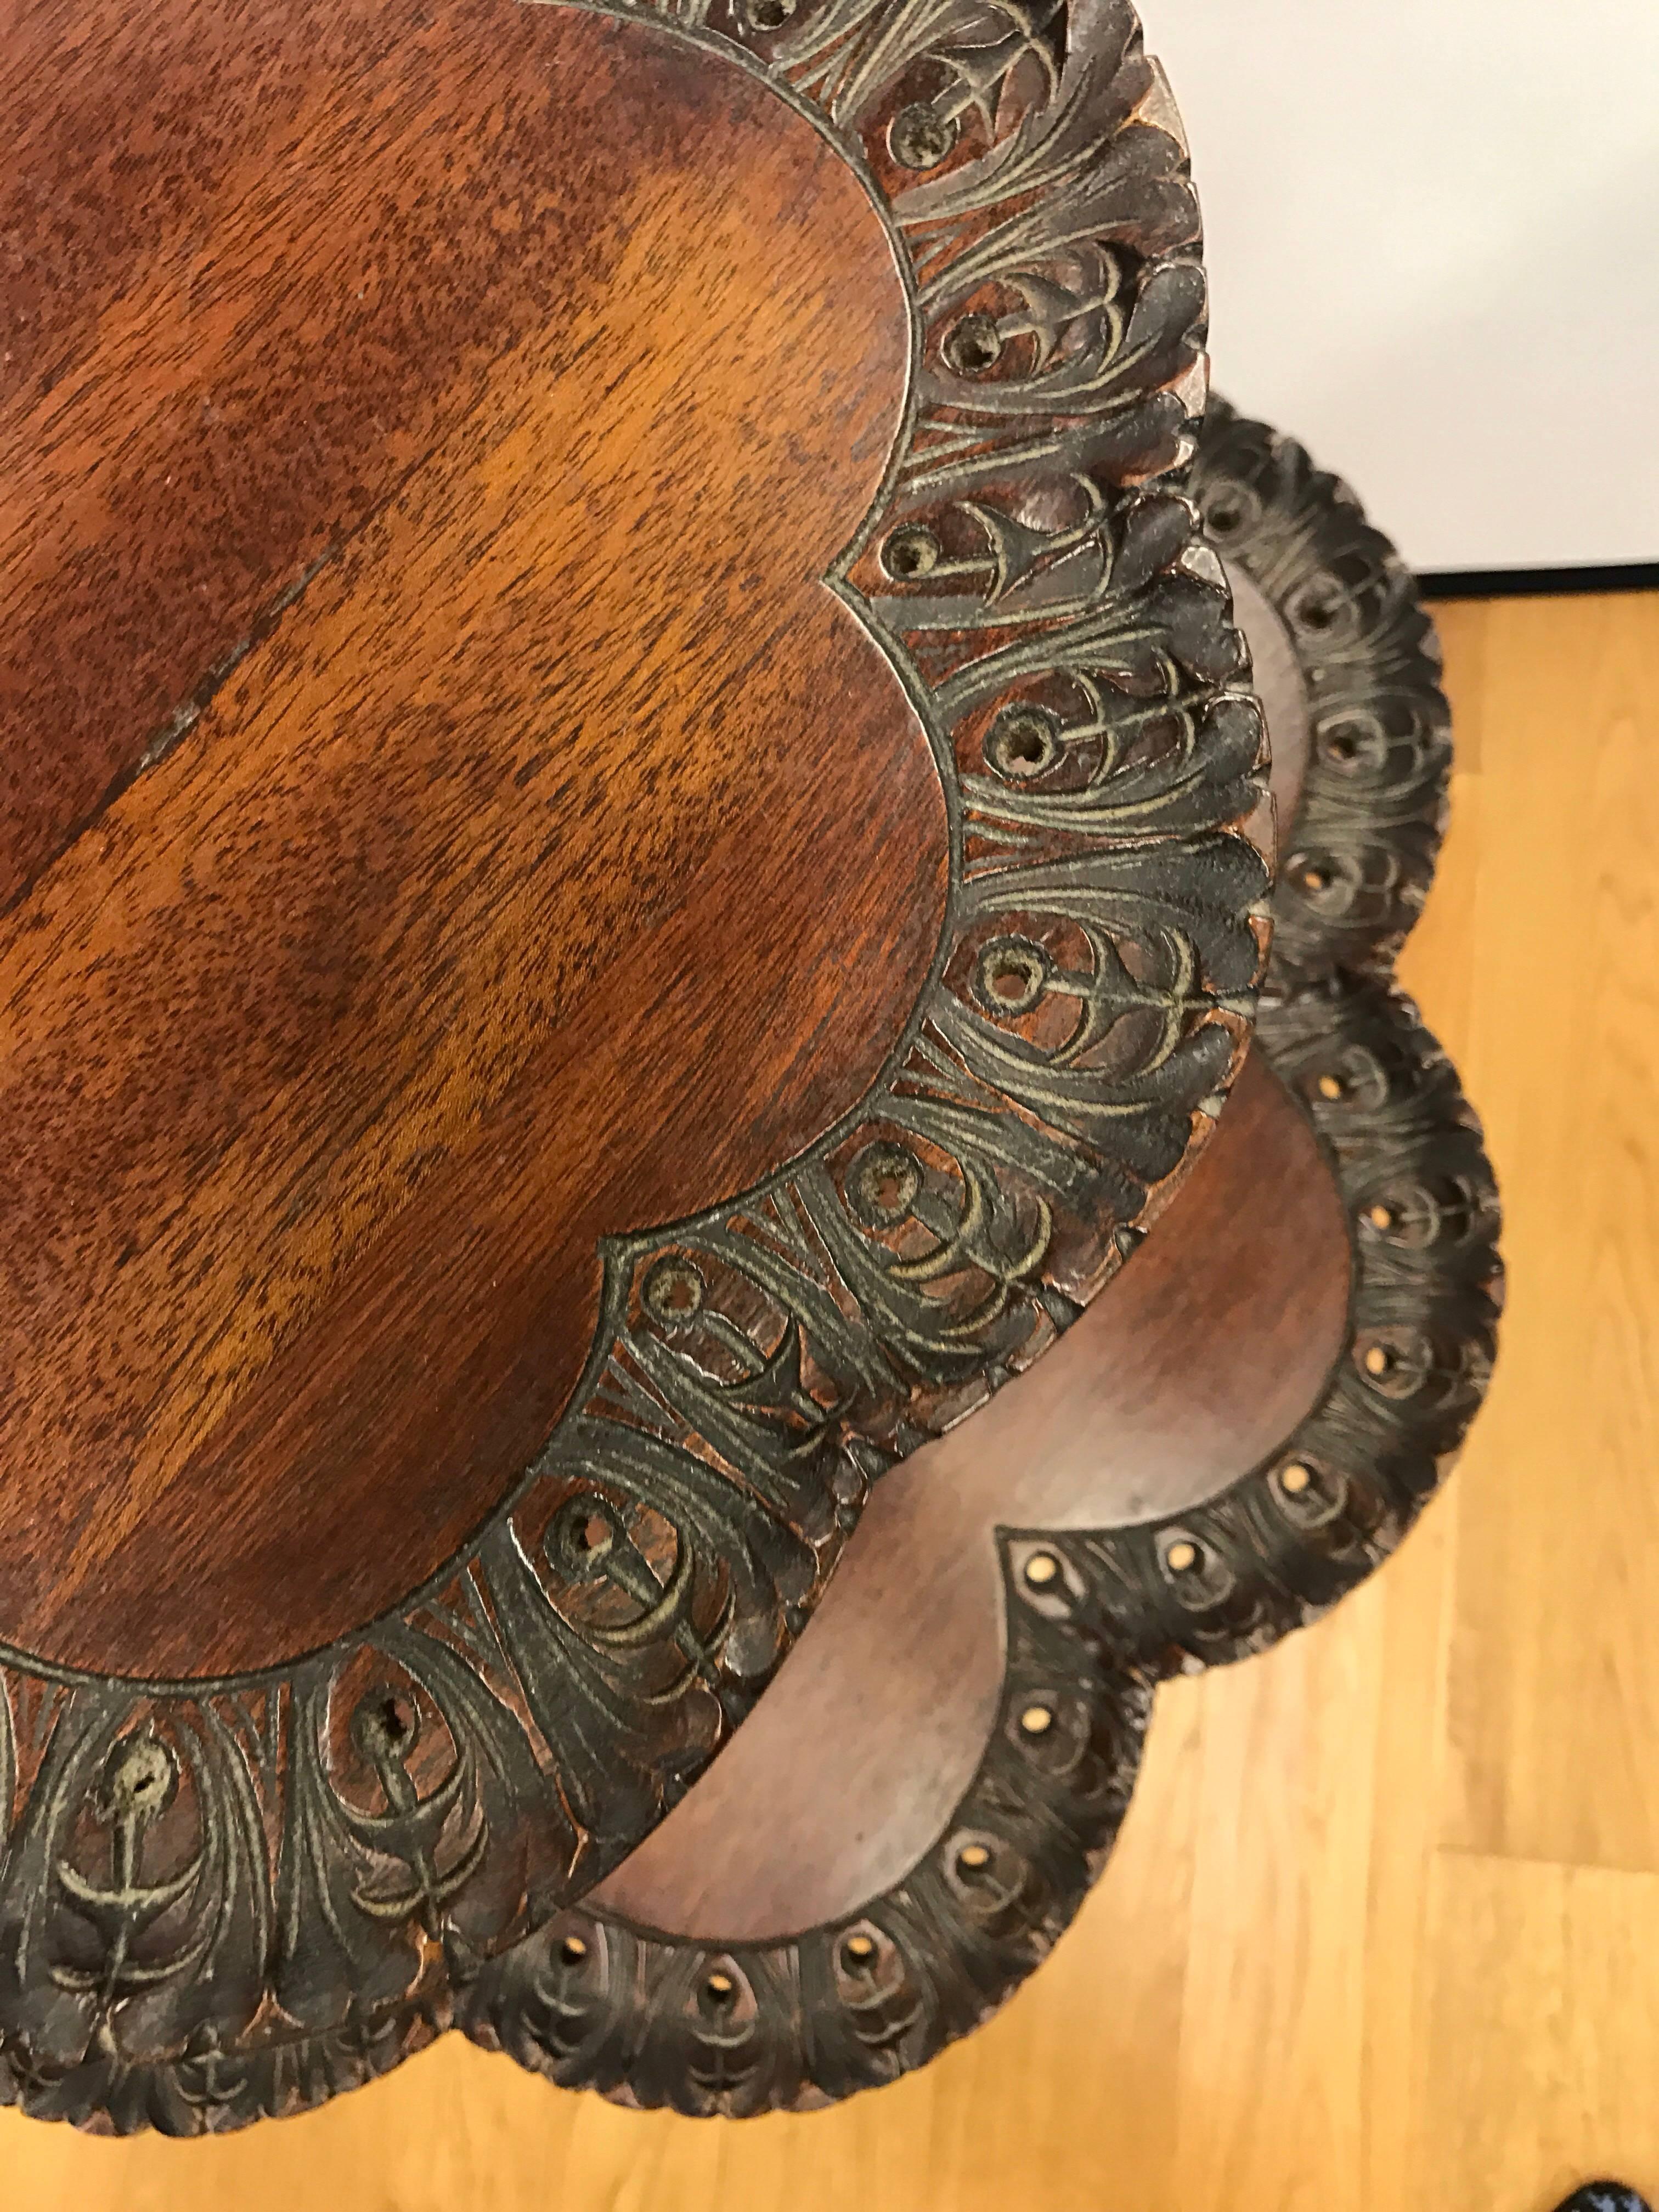 Antique Chippendale mahogany two-tiered pie crust table with carved detail on edge resting on three ball and claw feet. Pierced carvings around edge on both tiers make this a must have.